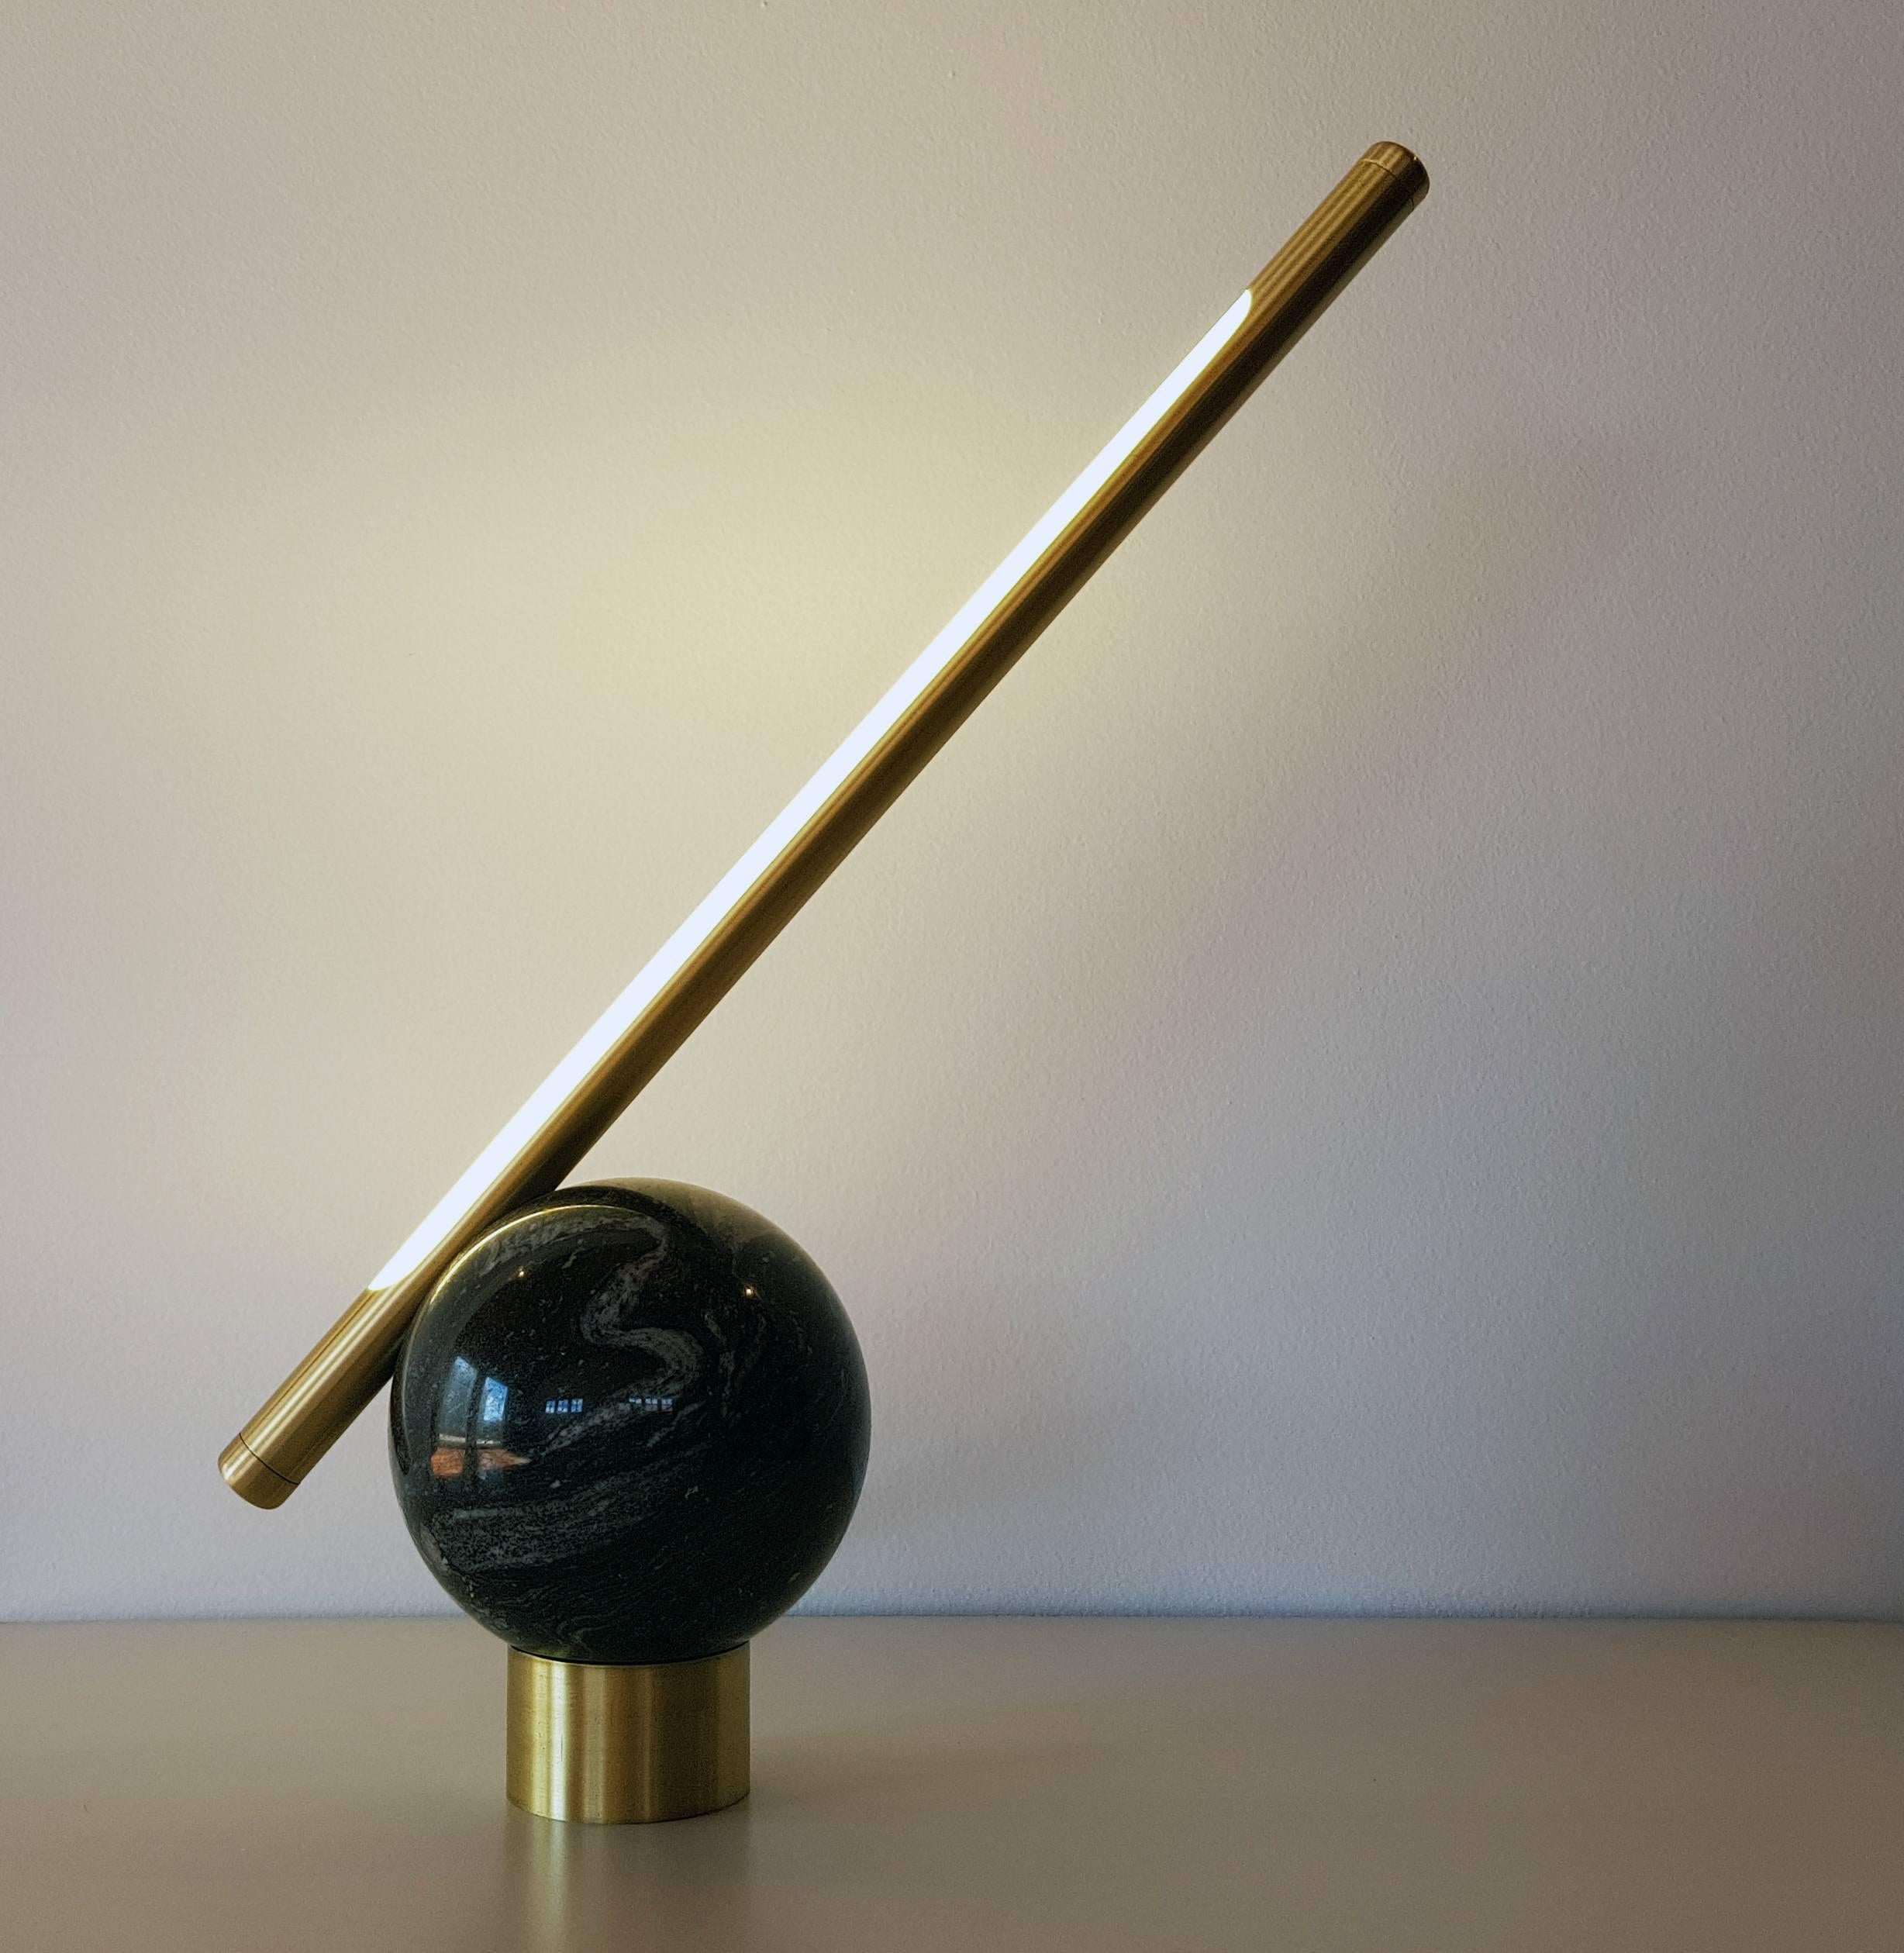 Polished 'Bubble' Table Lamp in Black Marble and Copper, Brazilian Contemporary Style For Sale